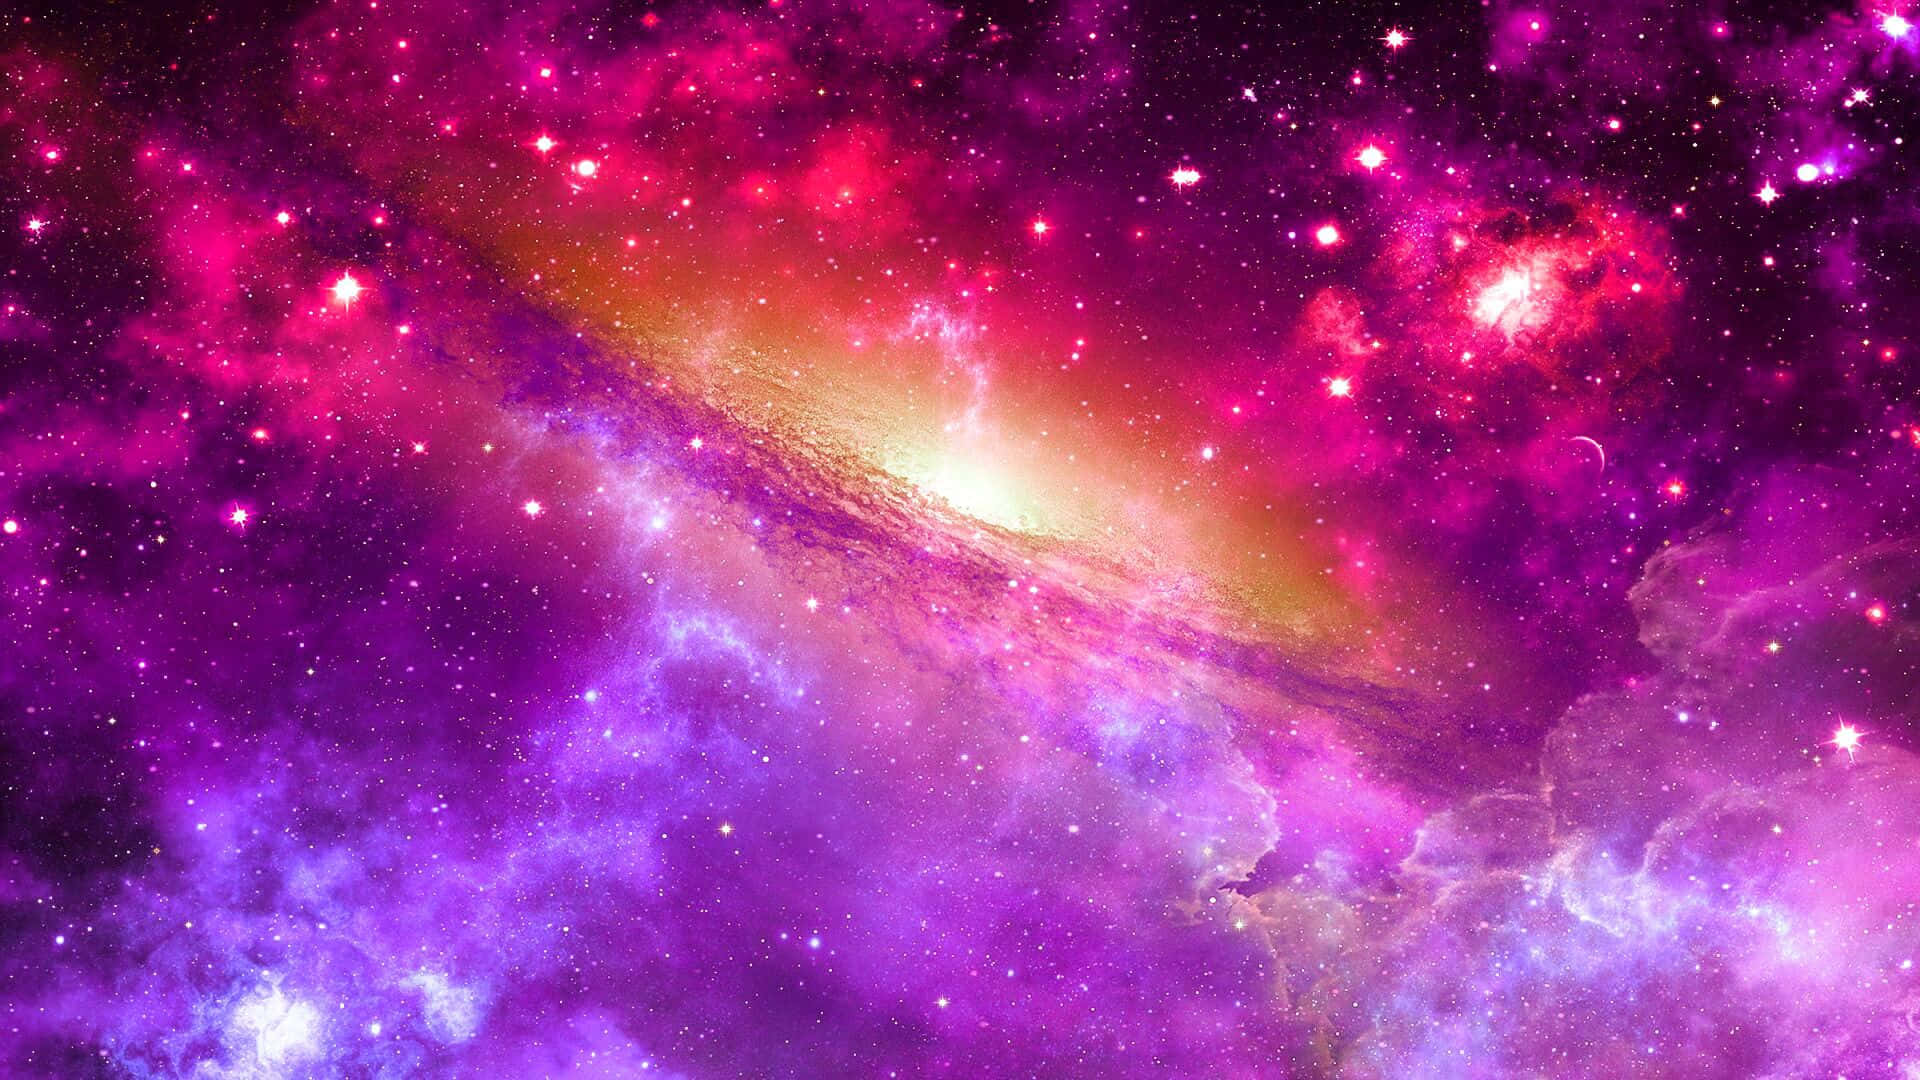 Galaxy Wallpapers Hd - Wallpapers For Pc